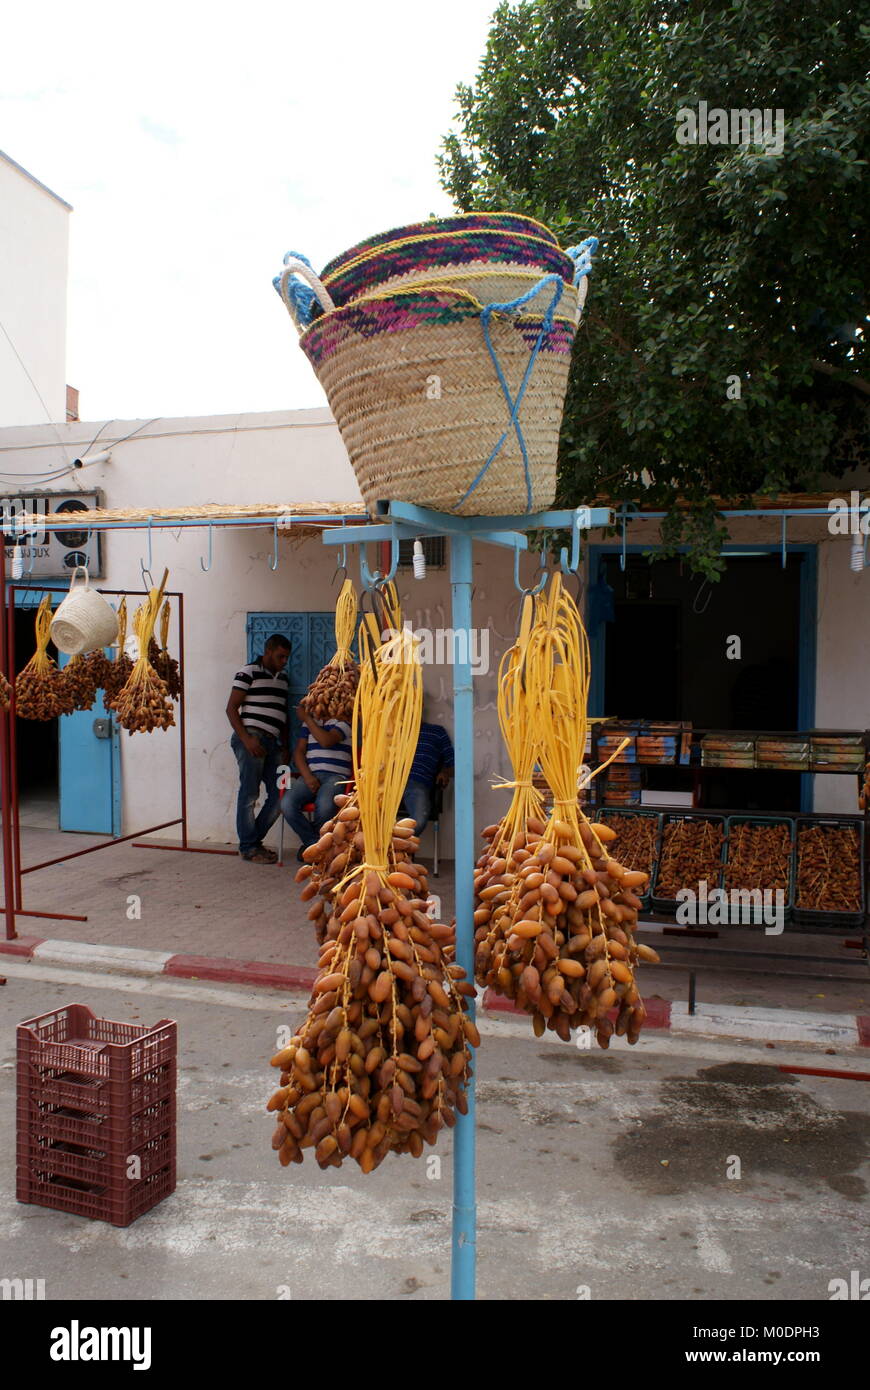 Dates and hand woven palm leaf baskets for sale, Douz, Tunisia Stock Photo